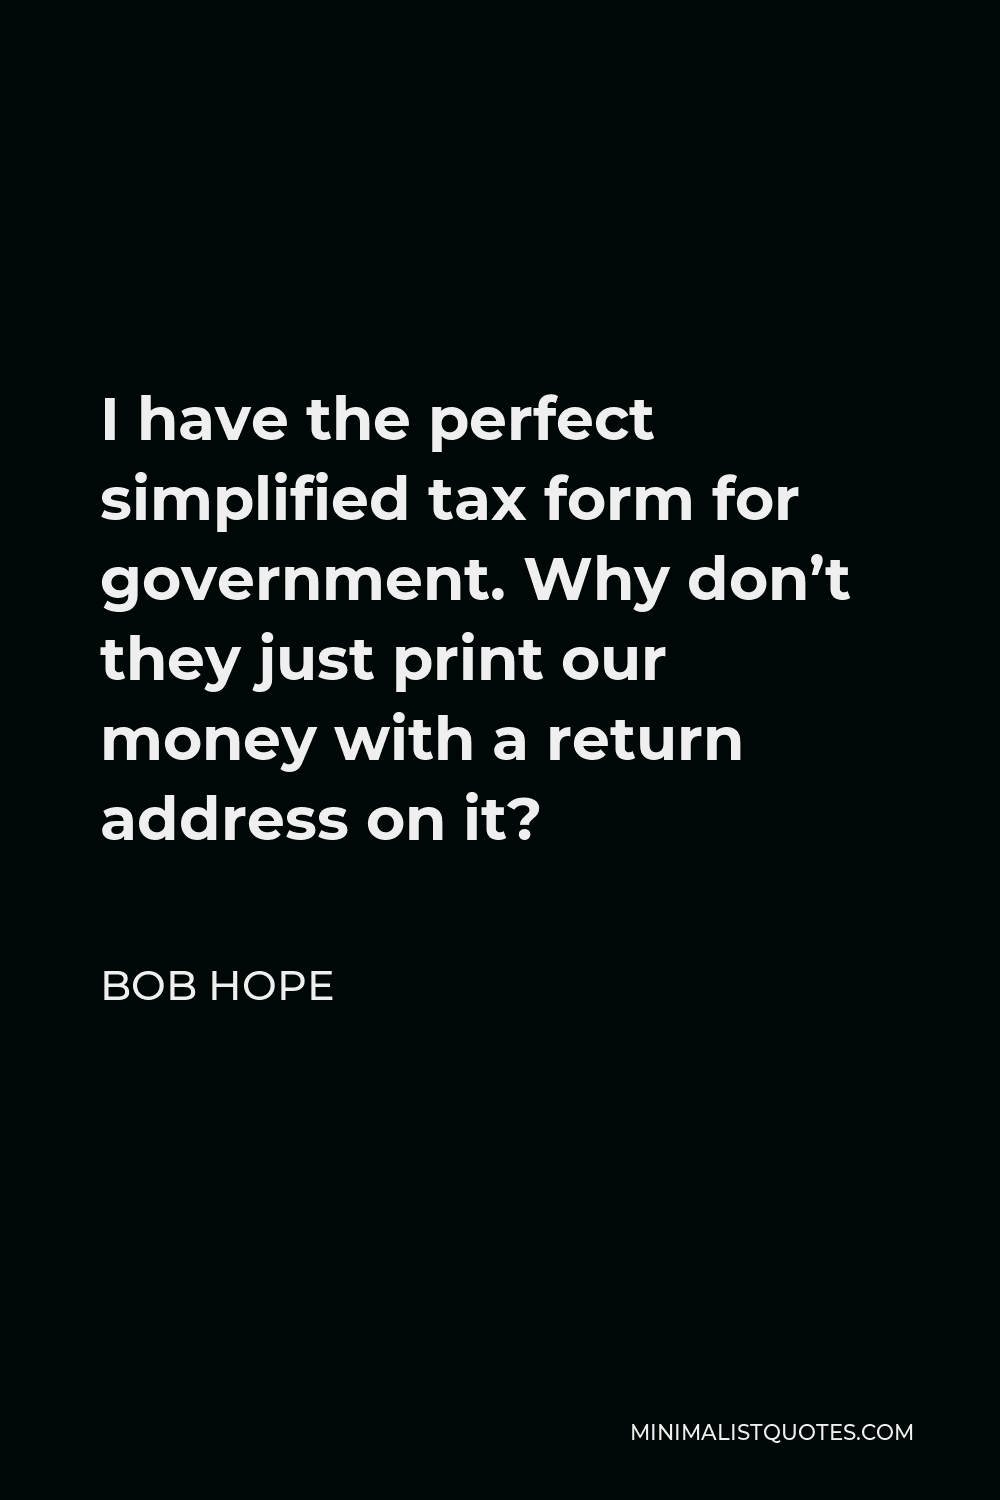 Bob Hope Quote - I have the perfect simplified tax form for government. Why don’t they just print our money with a return address on it?